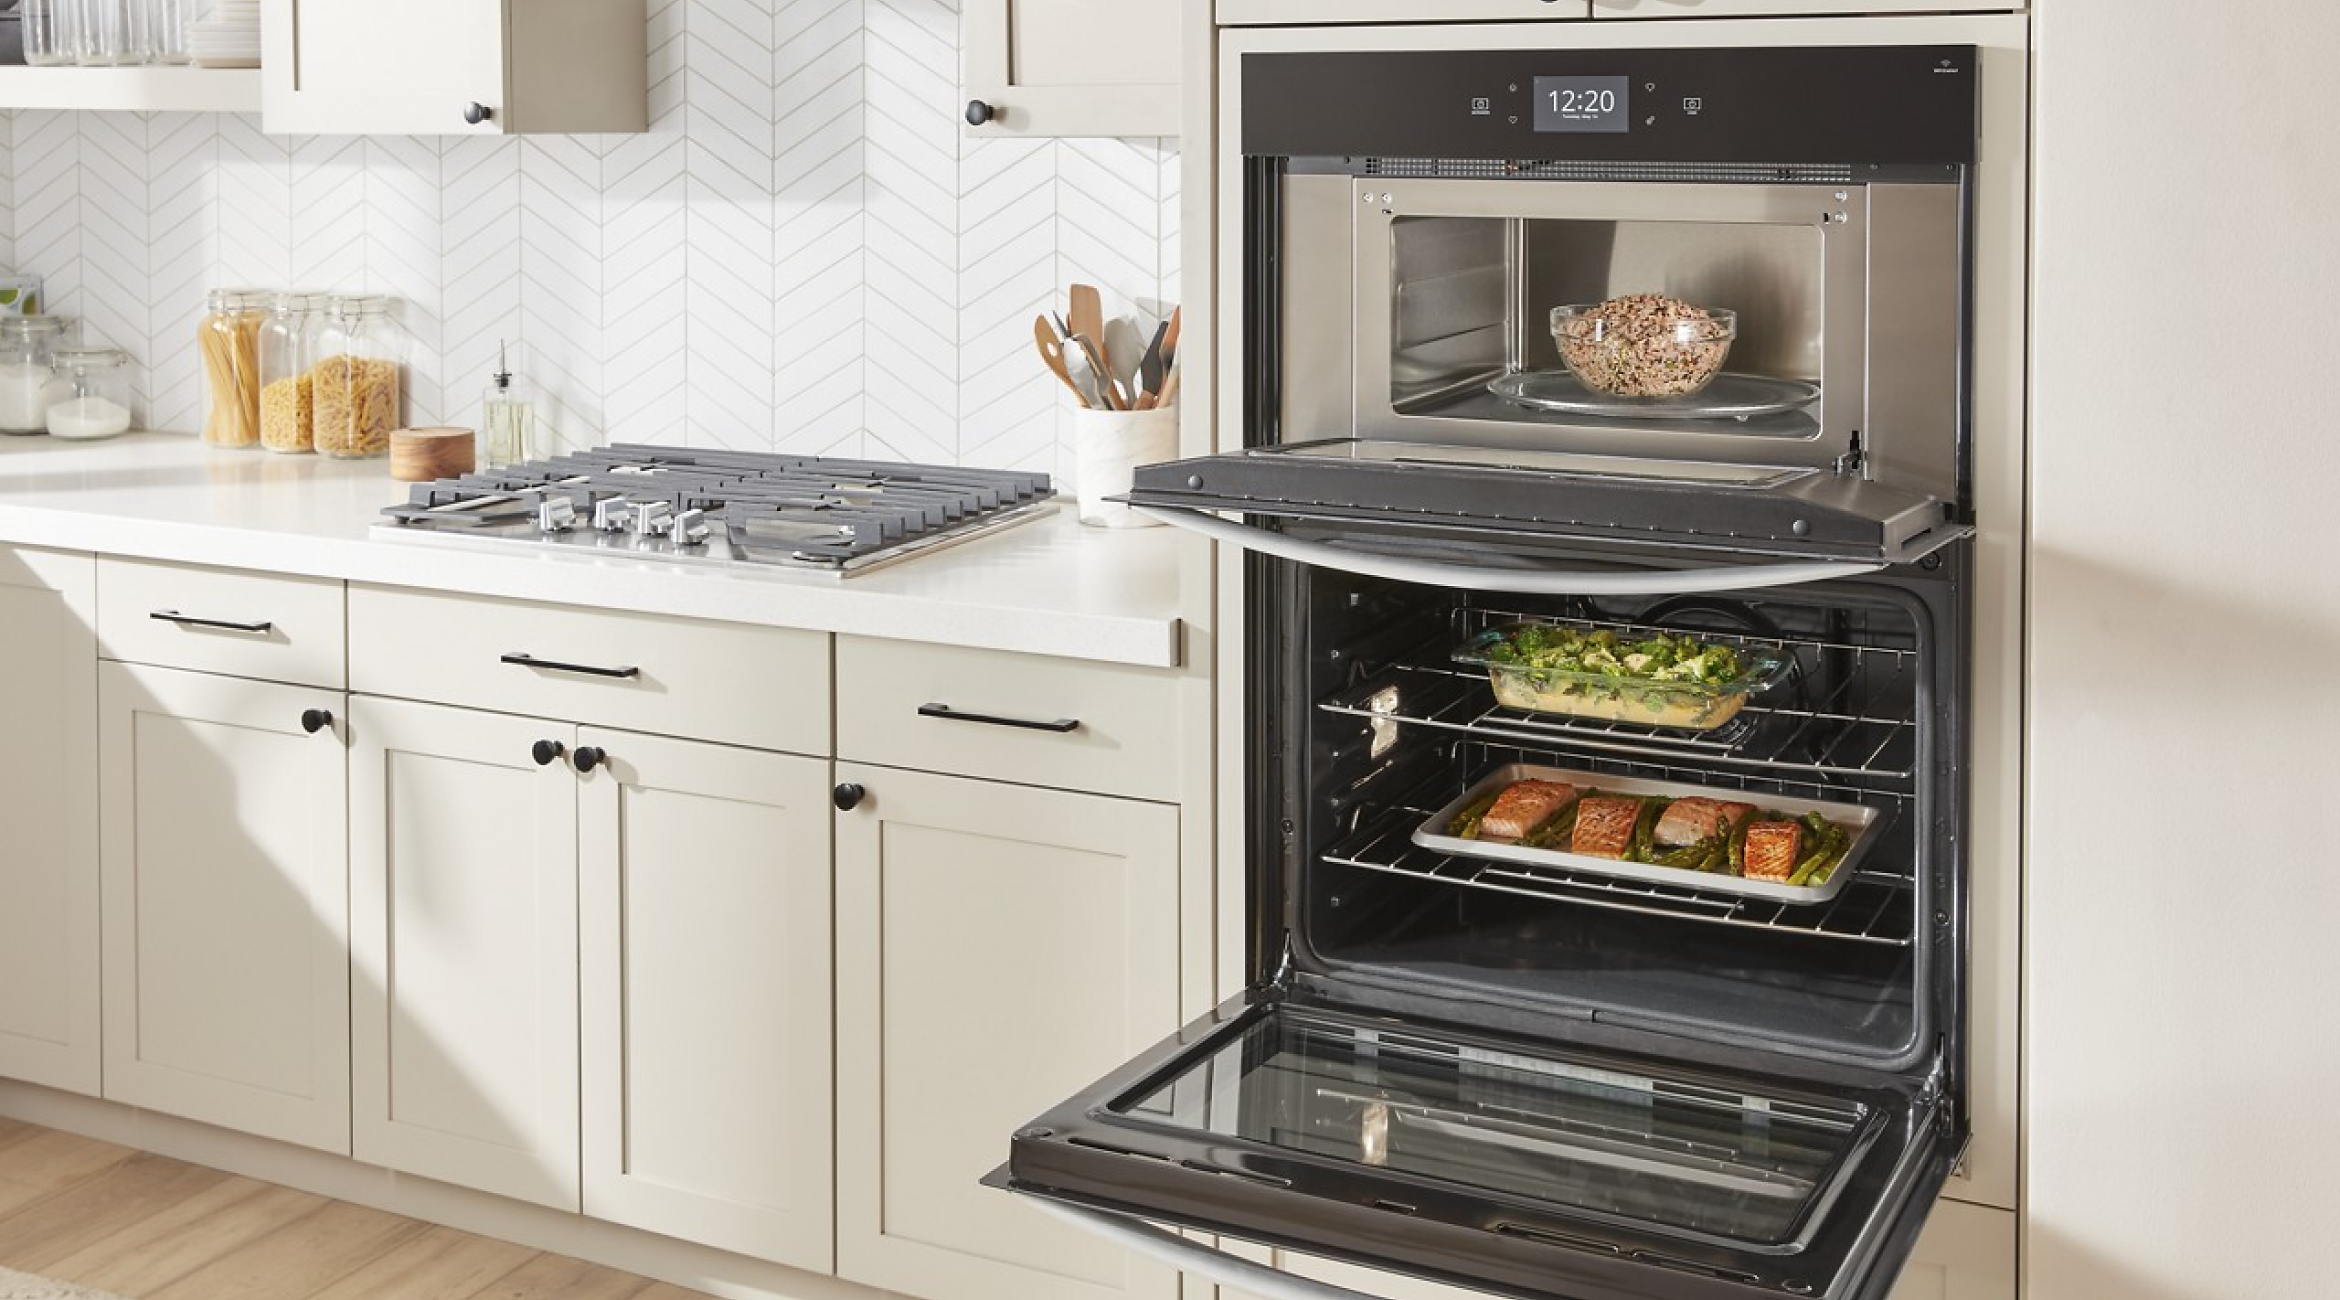 A Whirlpool® Premium Combination Wall Oven in a kitchen with the doors open, showing food inside the oven and microwave